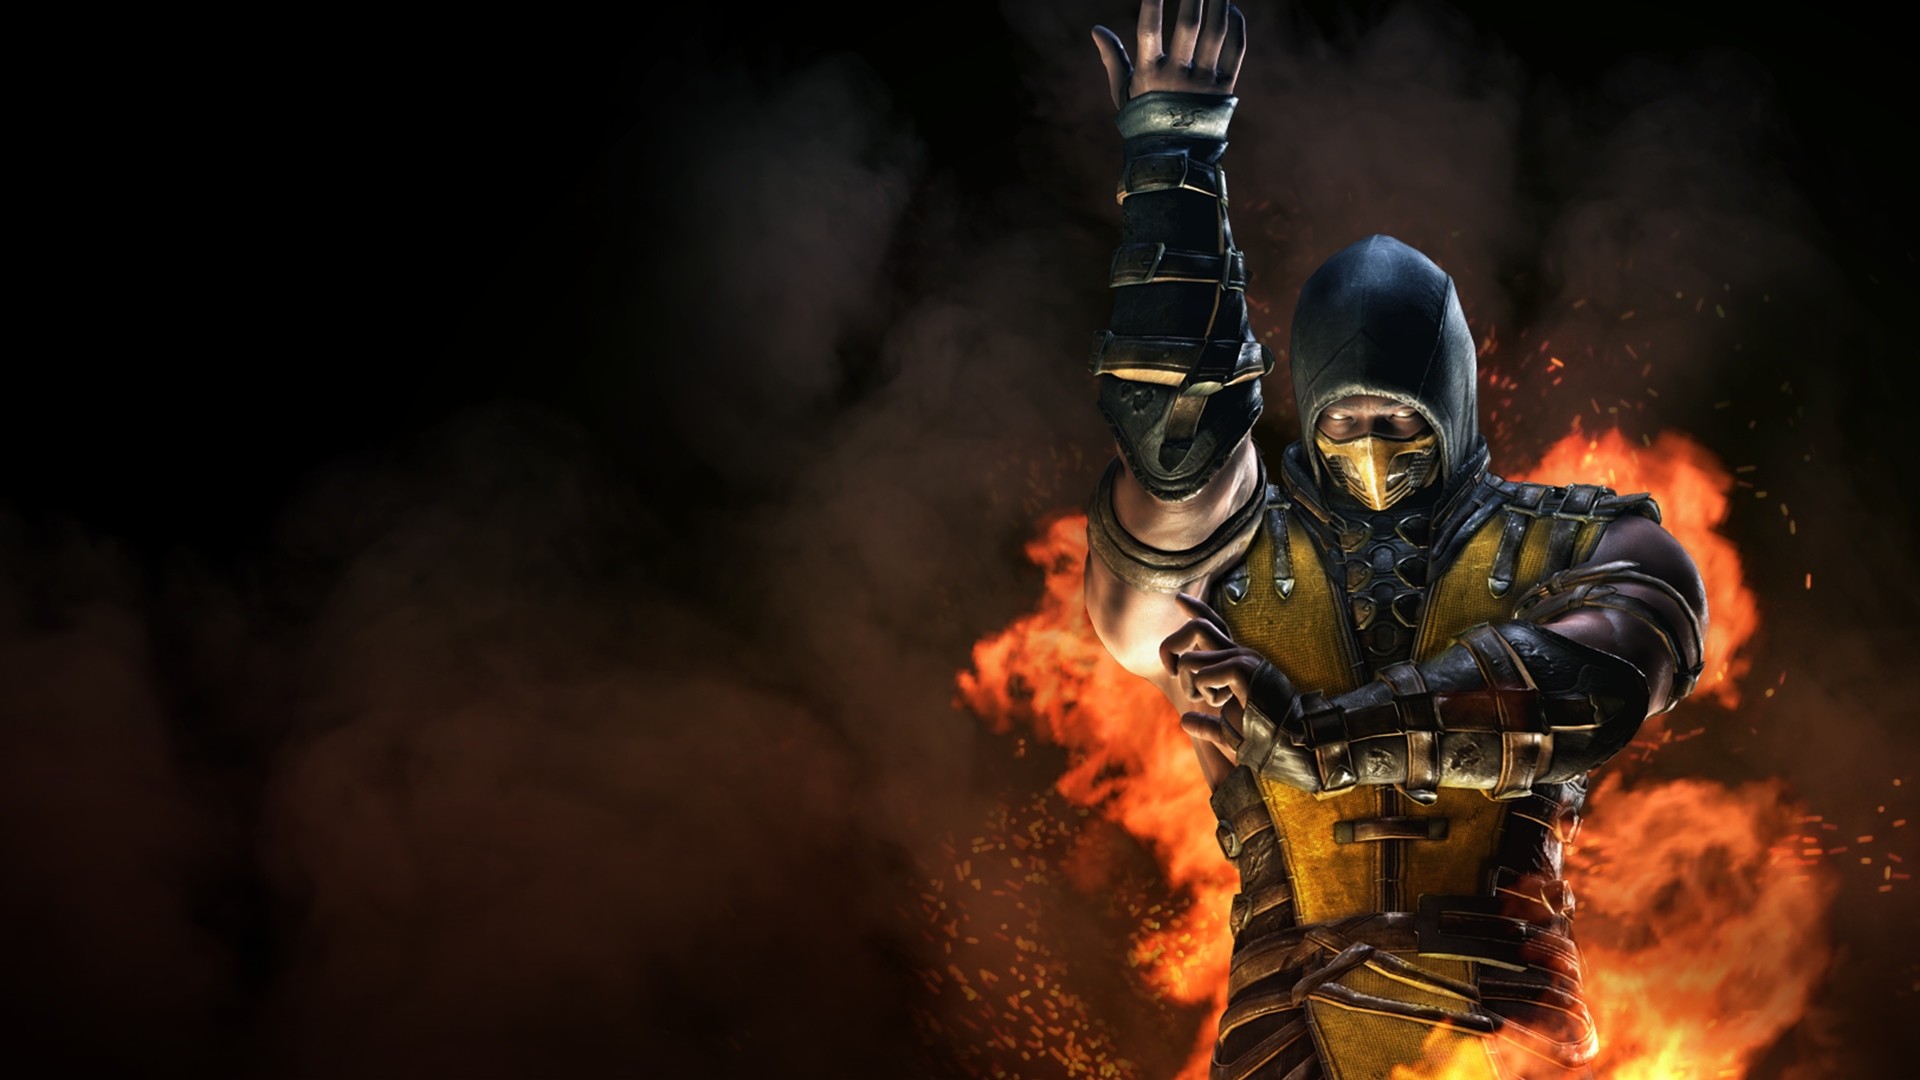 Download Mortal Kombat Scorpion With Flaming Chains Wallpaper | Wallpapers .com